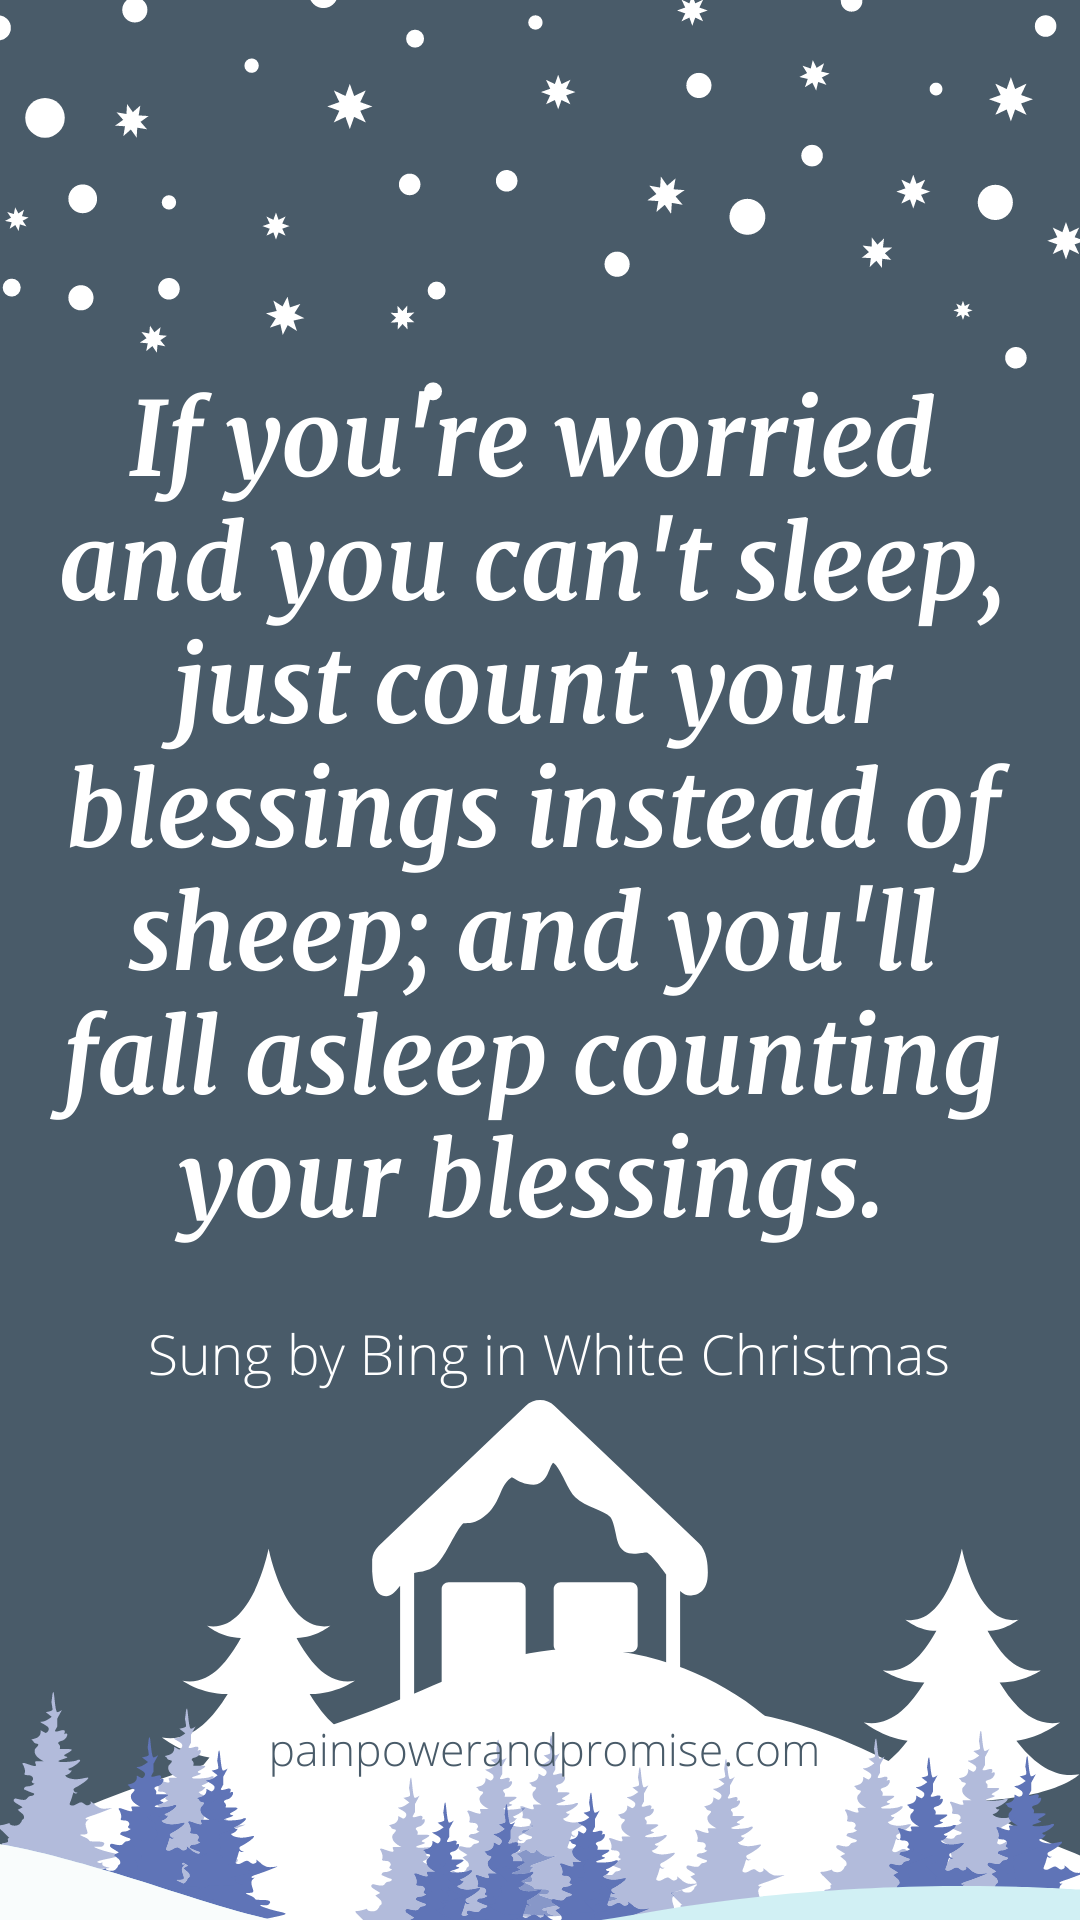 If you're worried and you can't sleep, just count your blessings instead of sheep; and you'll fall asleep counting your blessings.